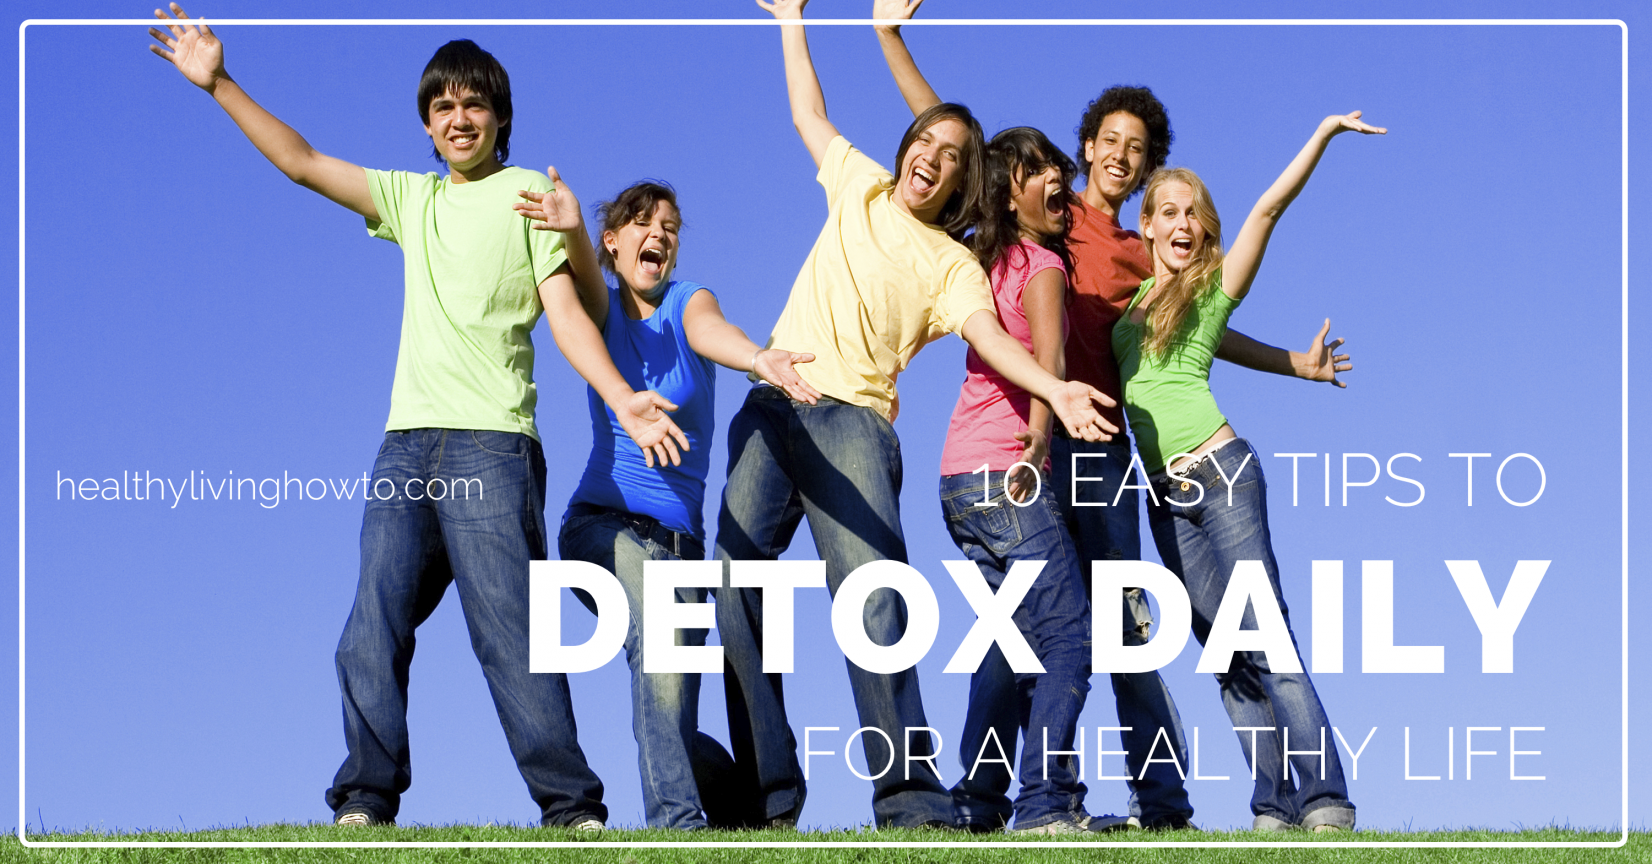 10 Easy Tips to Detox Daily for a Healthy Life | healthylivinghowto.com